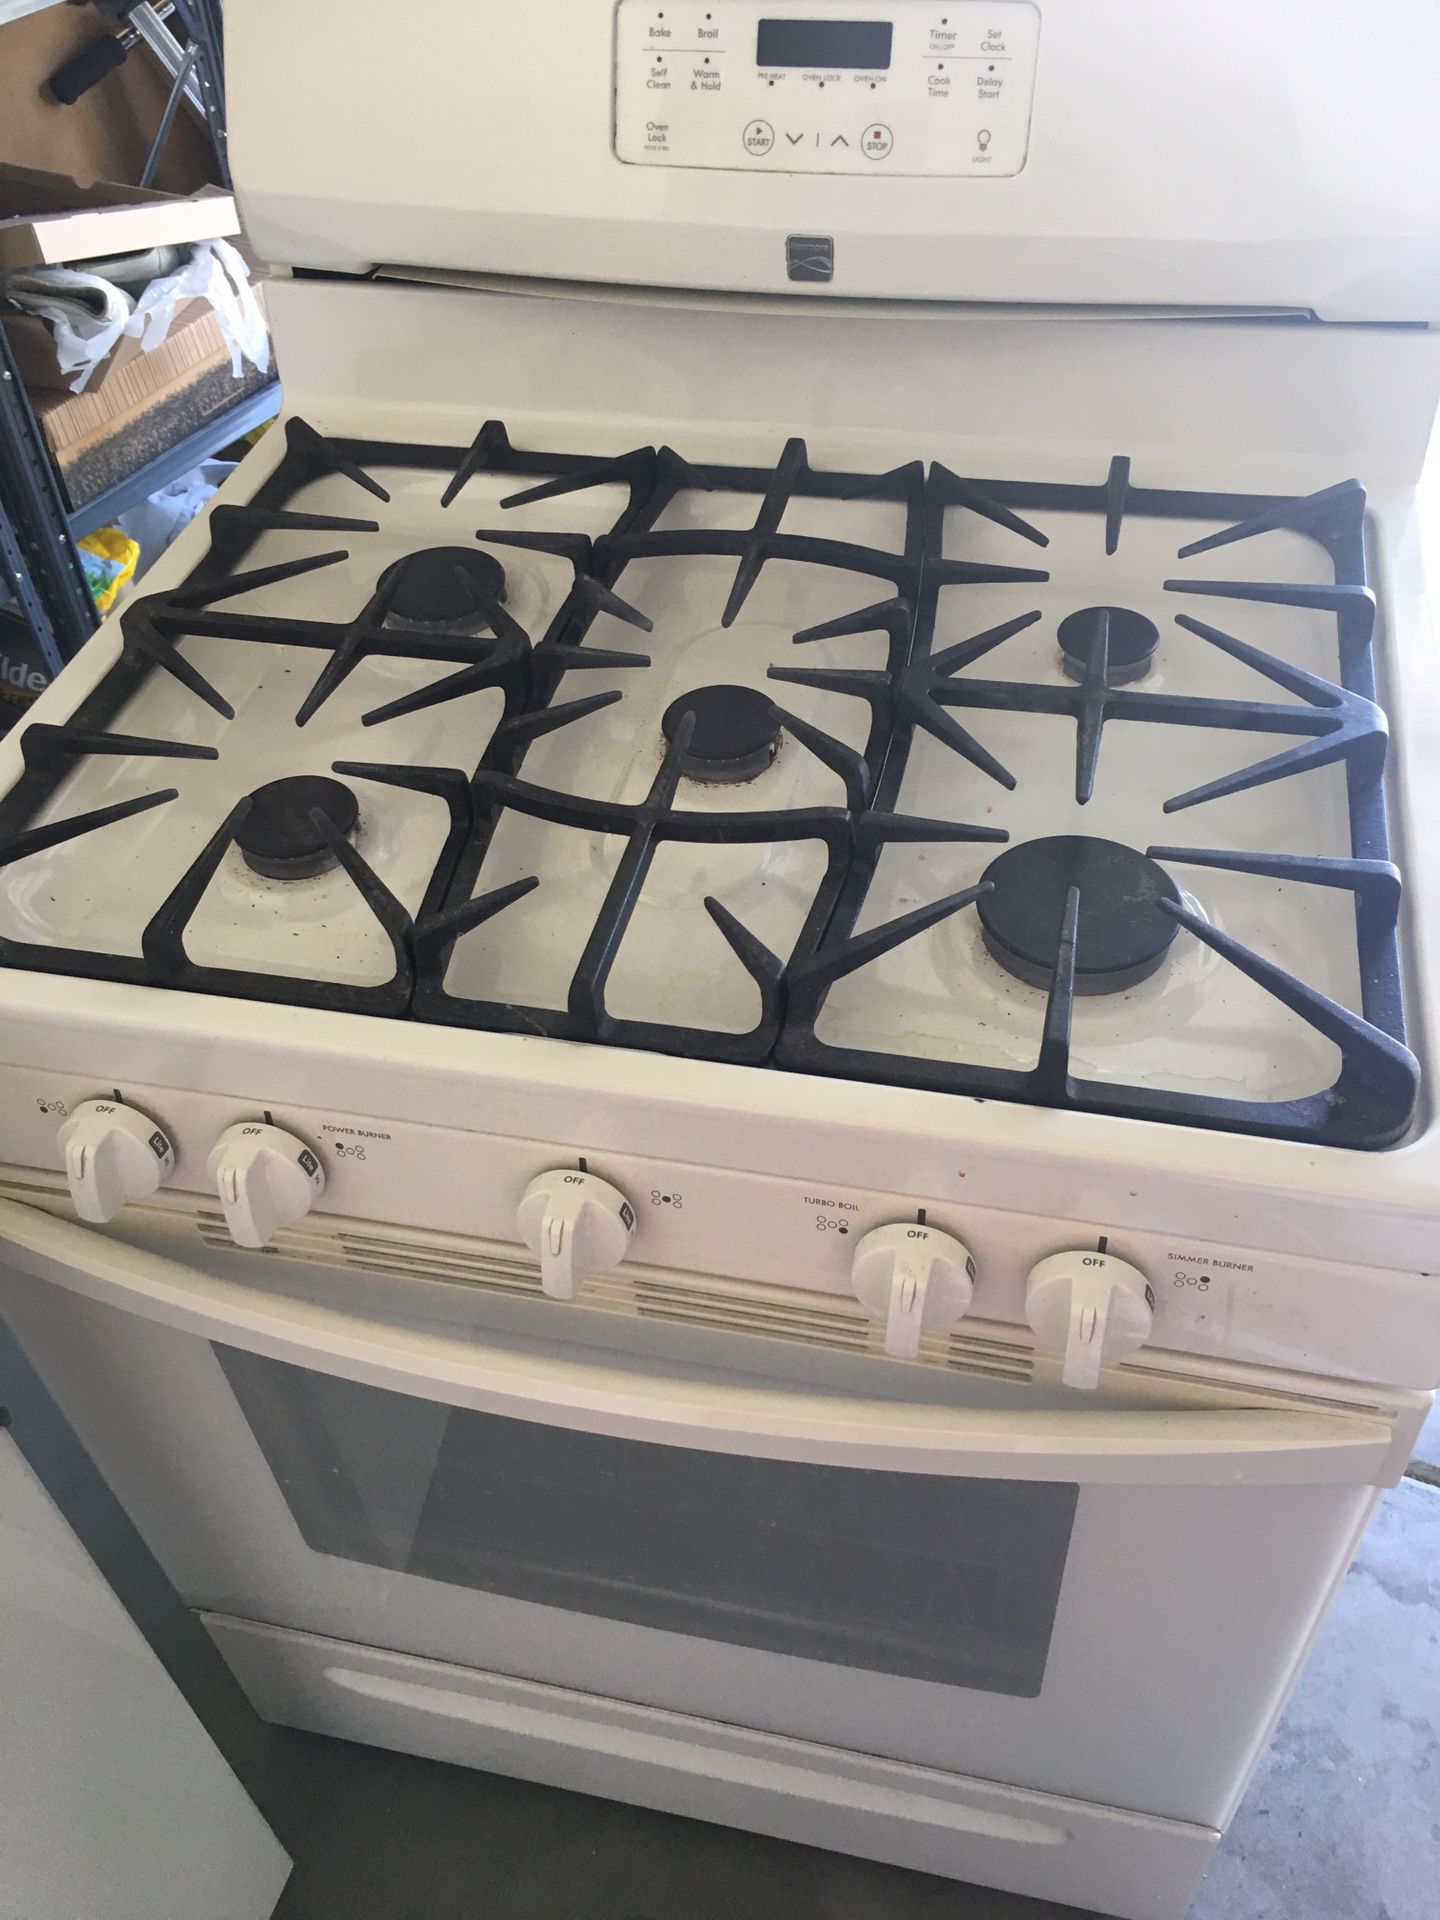 Kenmore Gas Stove / Range 5-burner Offwhite. Must be able to pick it up from our house garage.